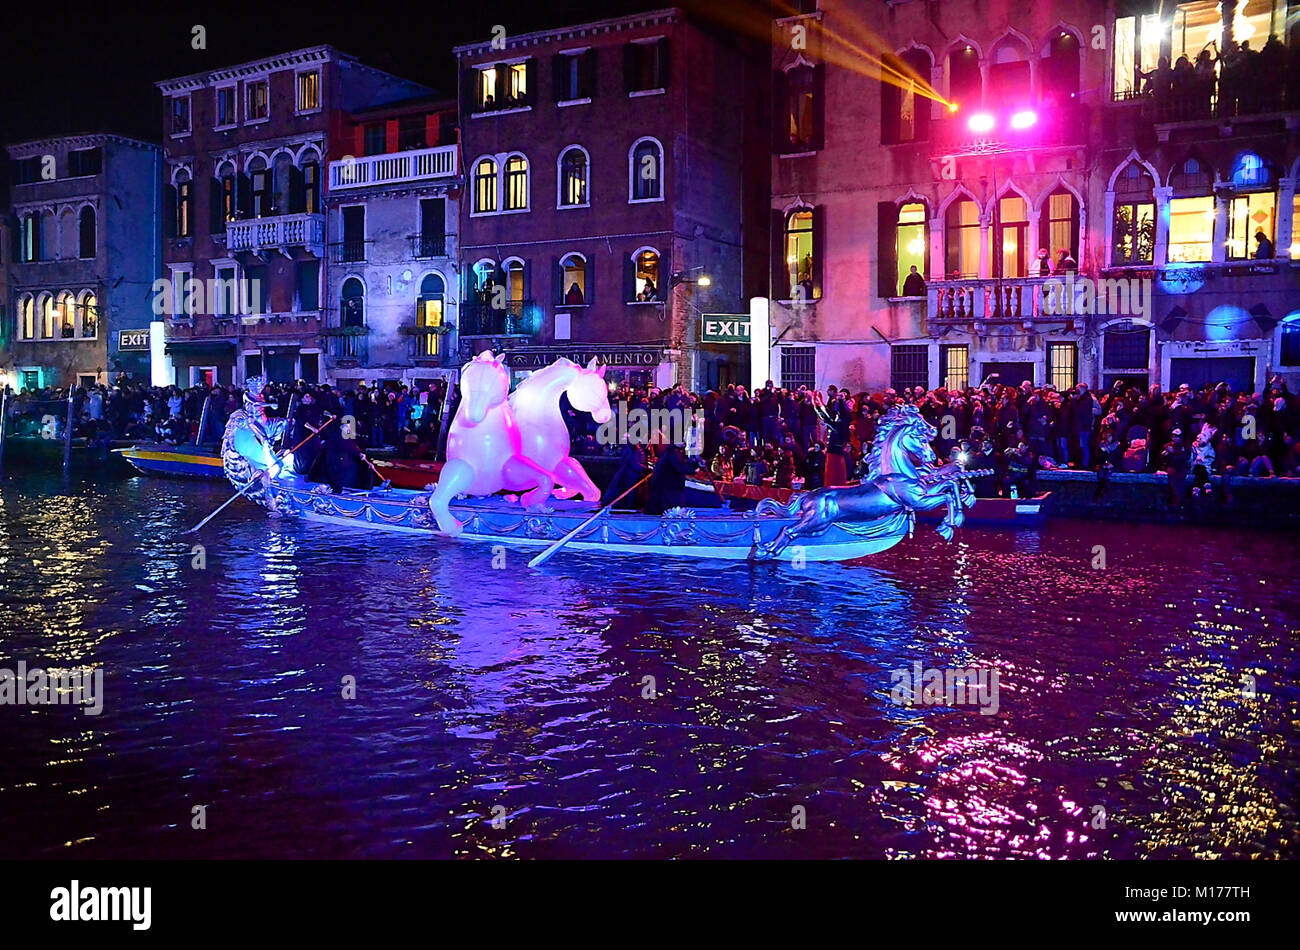 Venice, January 27th, 2018. The 2018 edition of the Venice Carnival opens with a colorful show on the water. Illuminated boats carry some 'papier-machè', circus animals and clowns, acrobats and fire-eaters. The show also pays a tribute to Federico Fellini's cinema and film music. Thousands of people enjoy the show from the banks. Stock Photo